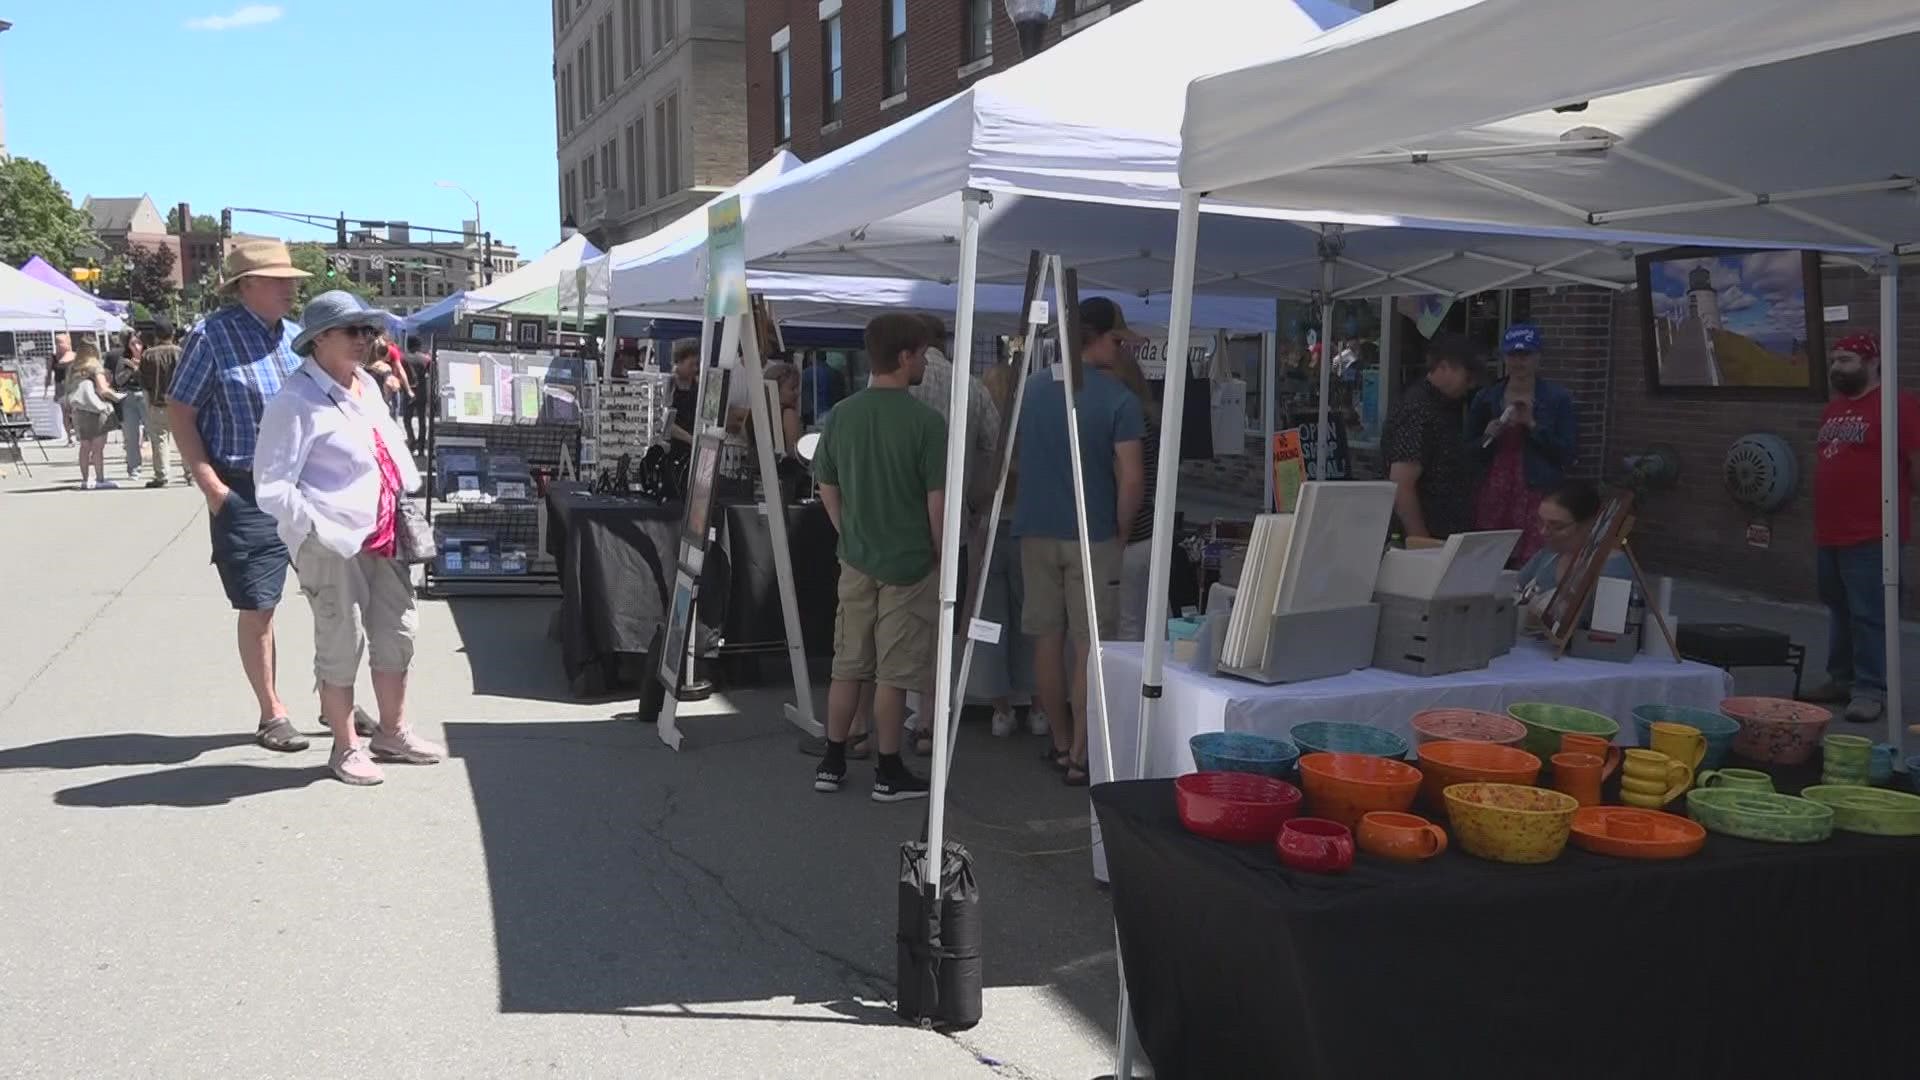 This year the event brought in more than 40 local vendors to put their handmade artwork and creations on display.